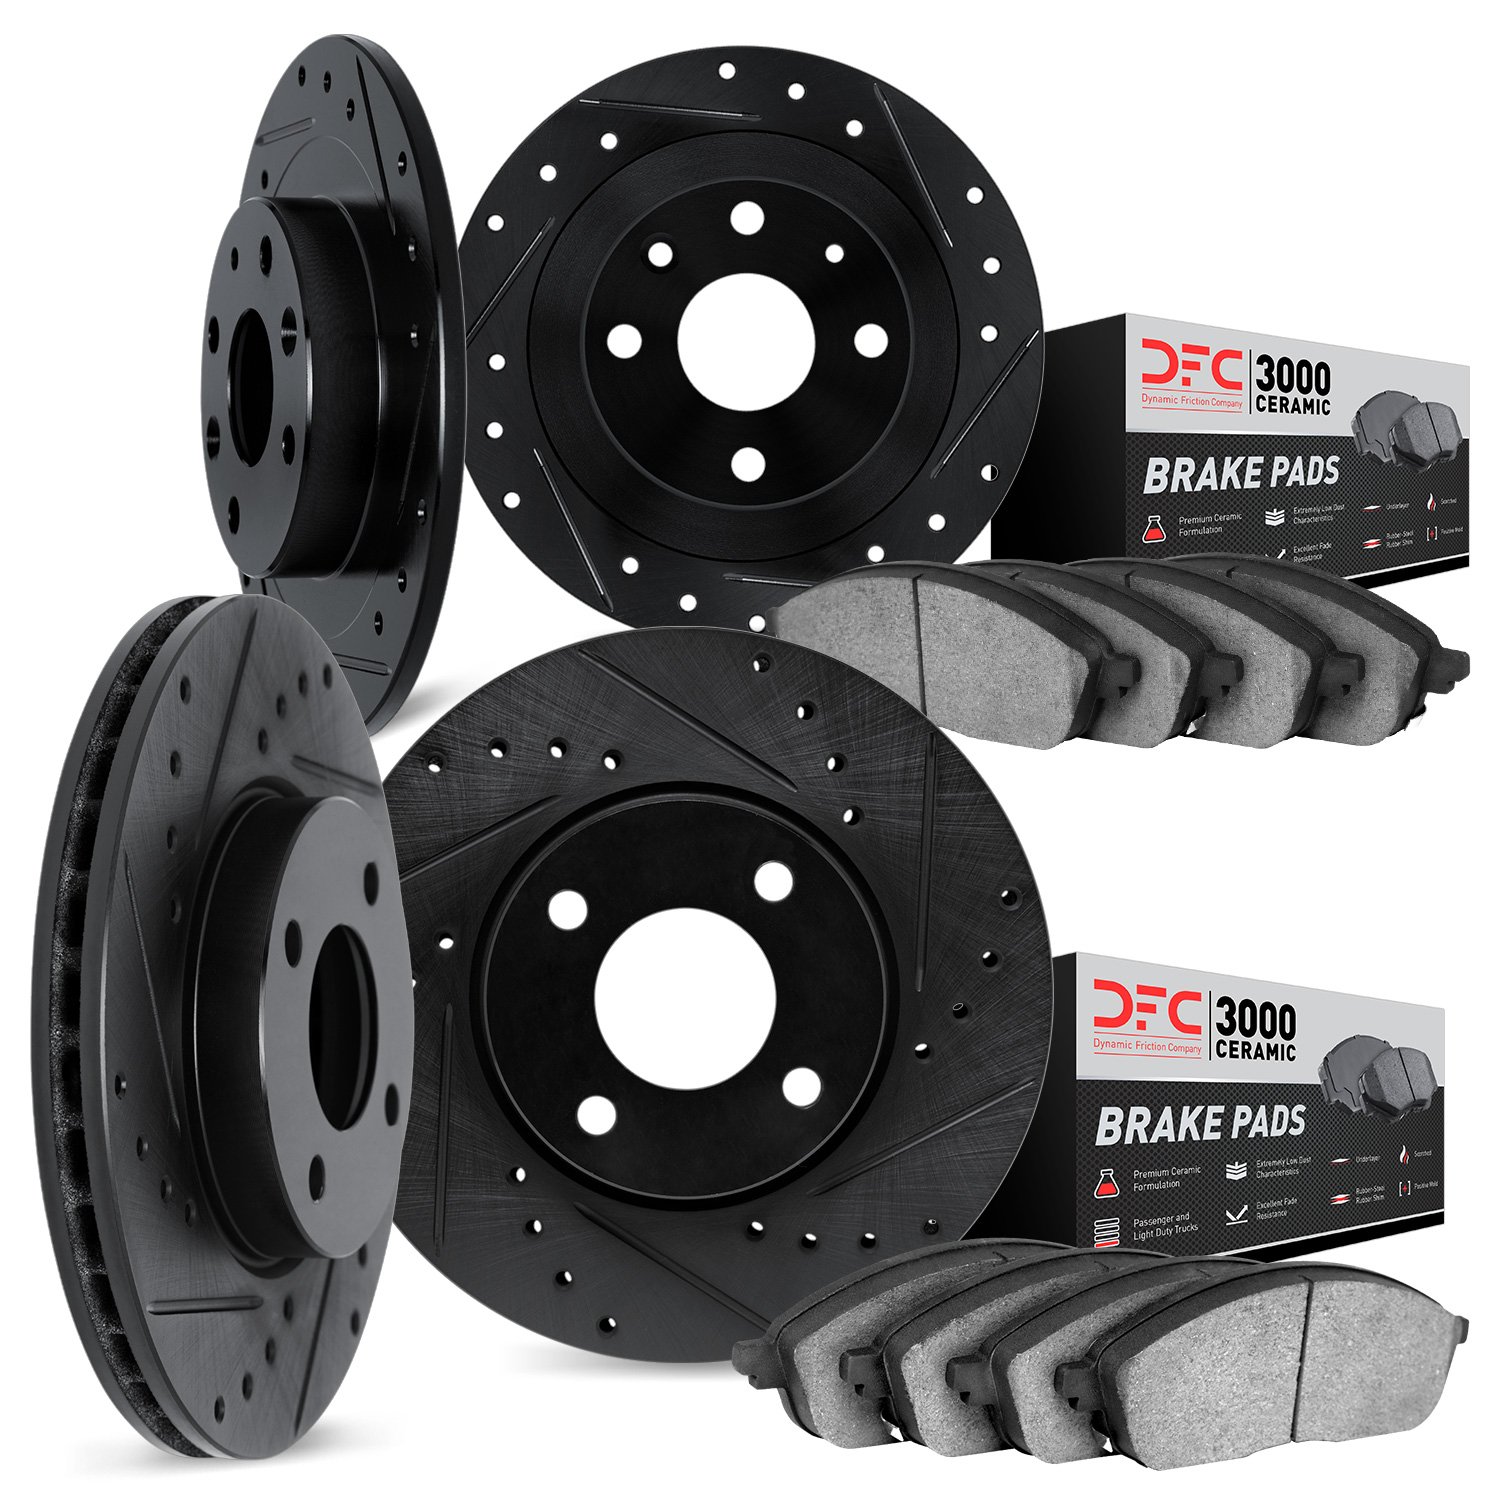 8304-59013 Drilled/Slotted Brake Rotors with 3000-Series Ceramic Brake Pads Kit [Black], 1998-1999 Acura/Honda, Position: Front